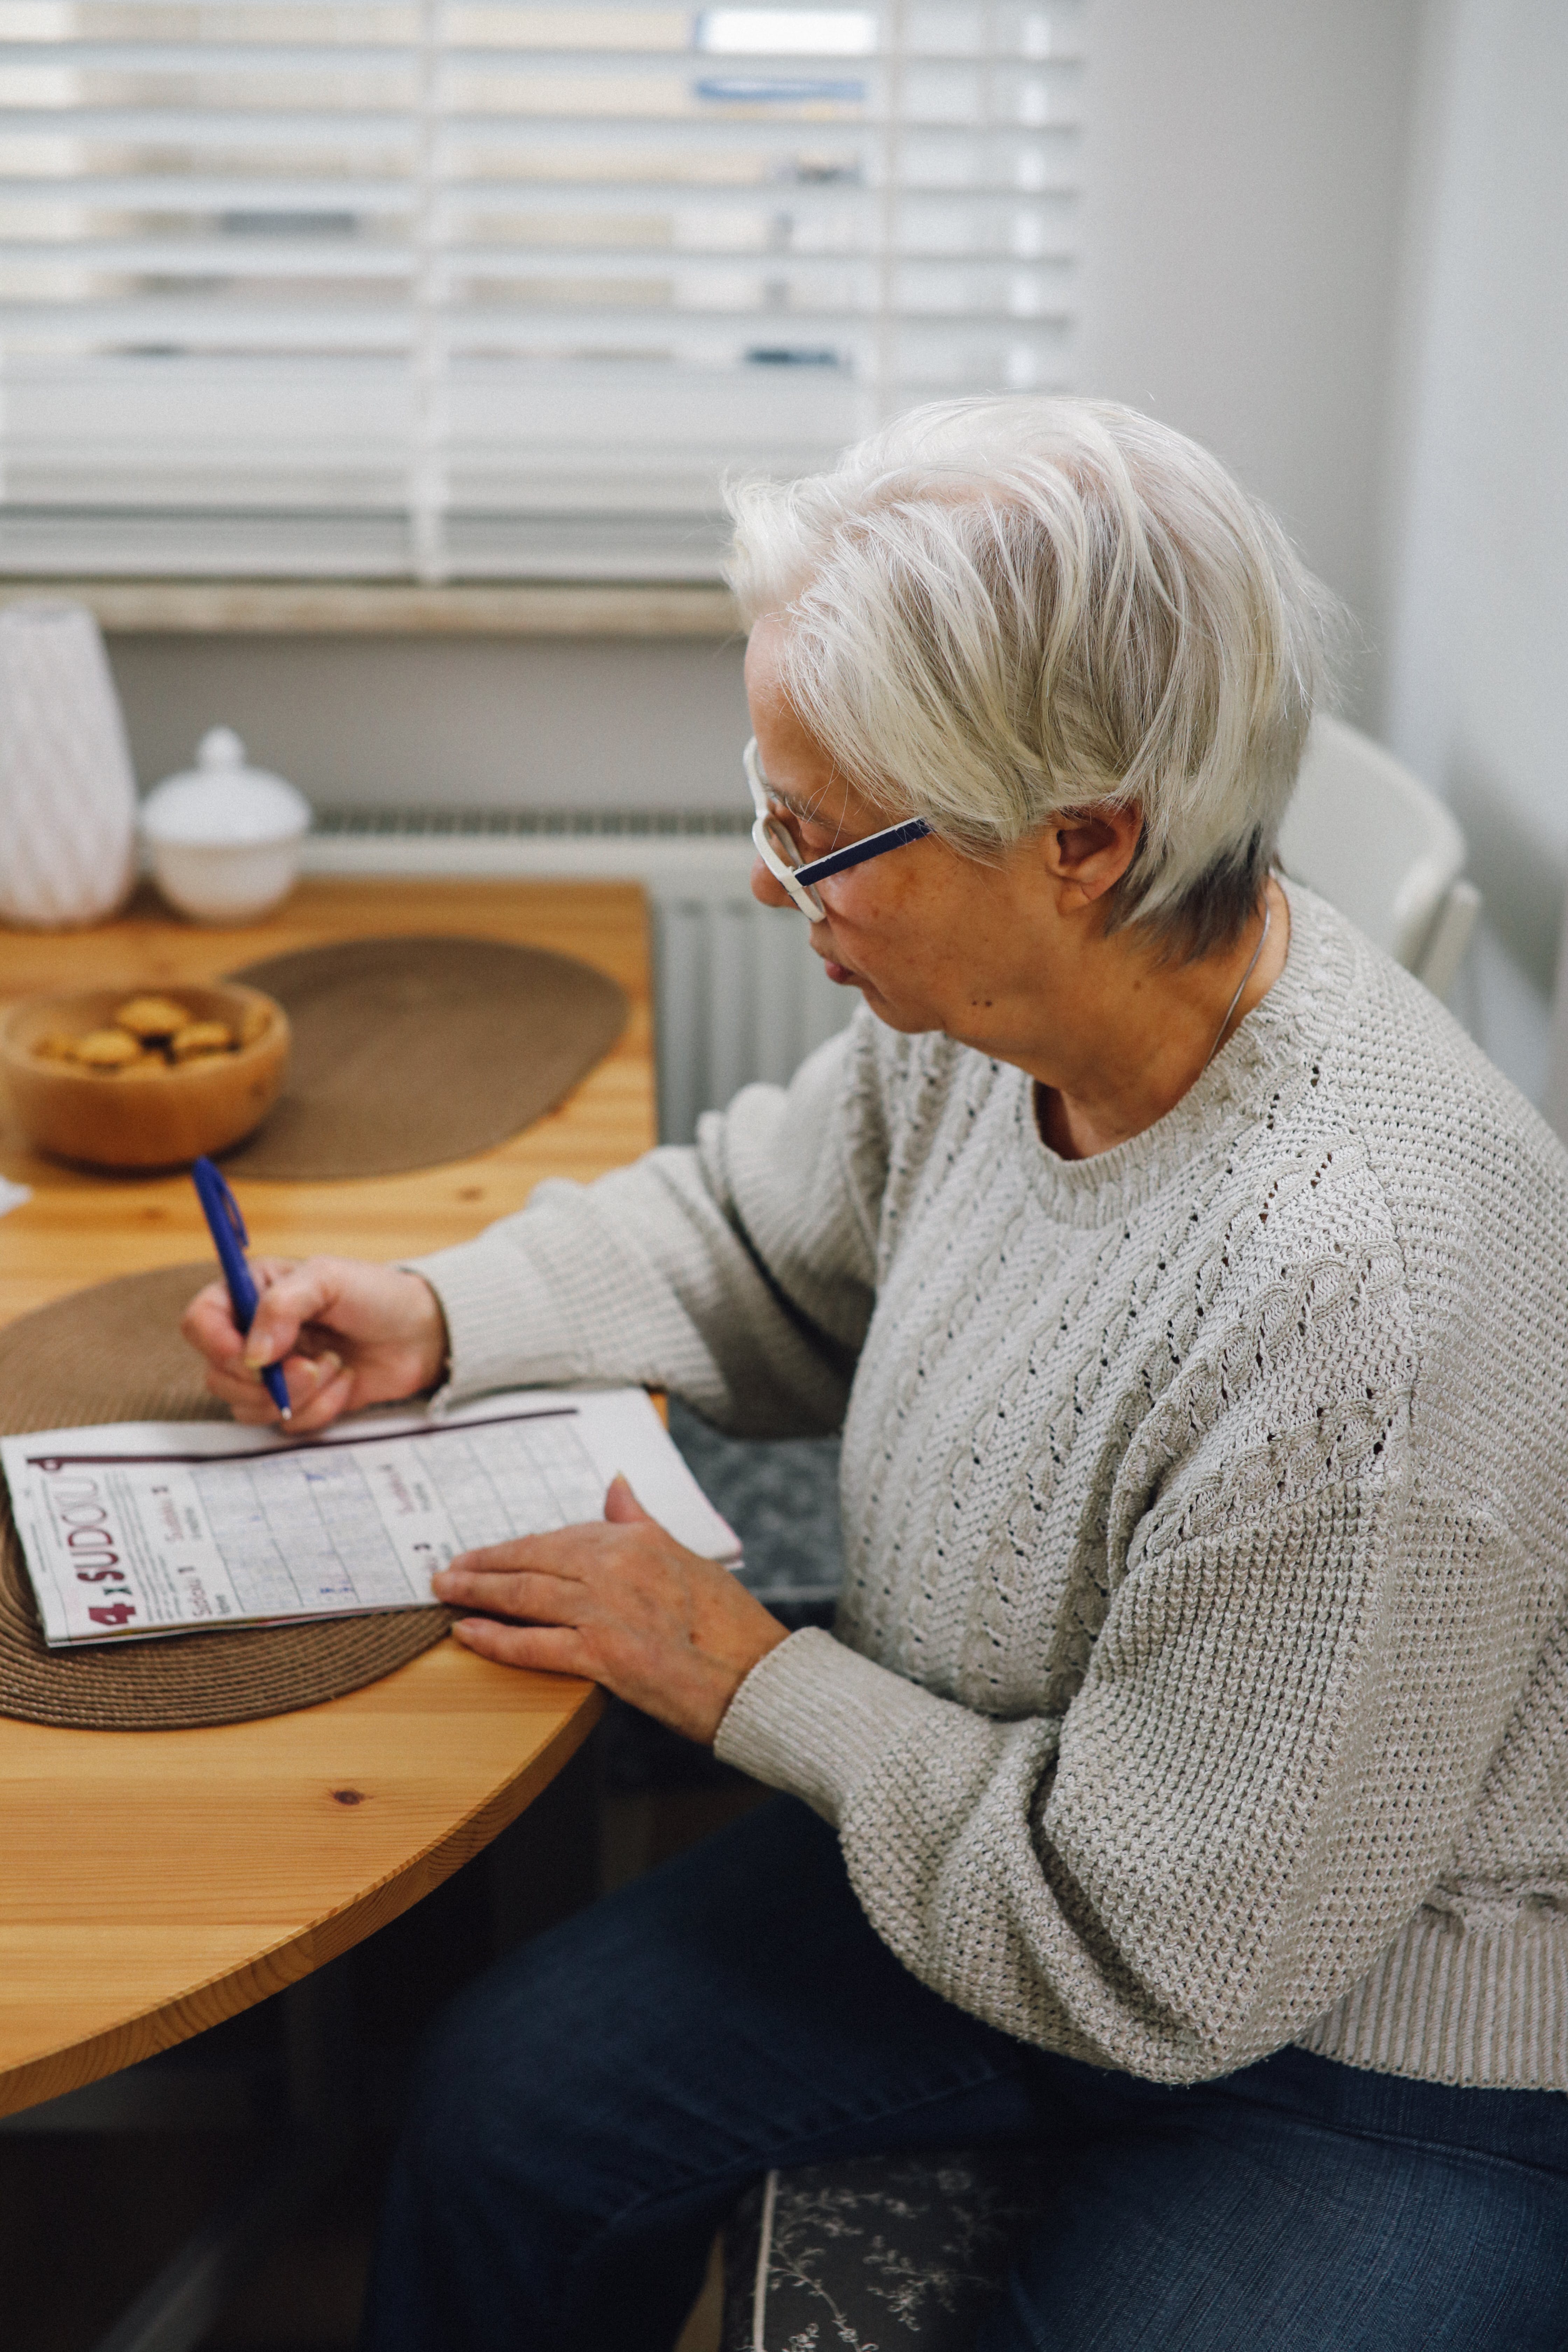 An elderly woman writing on a piece of paper. | Source: Pexels